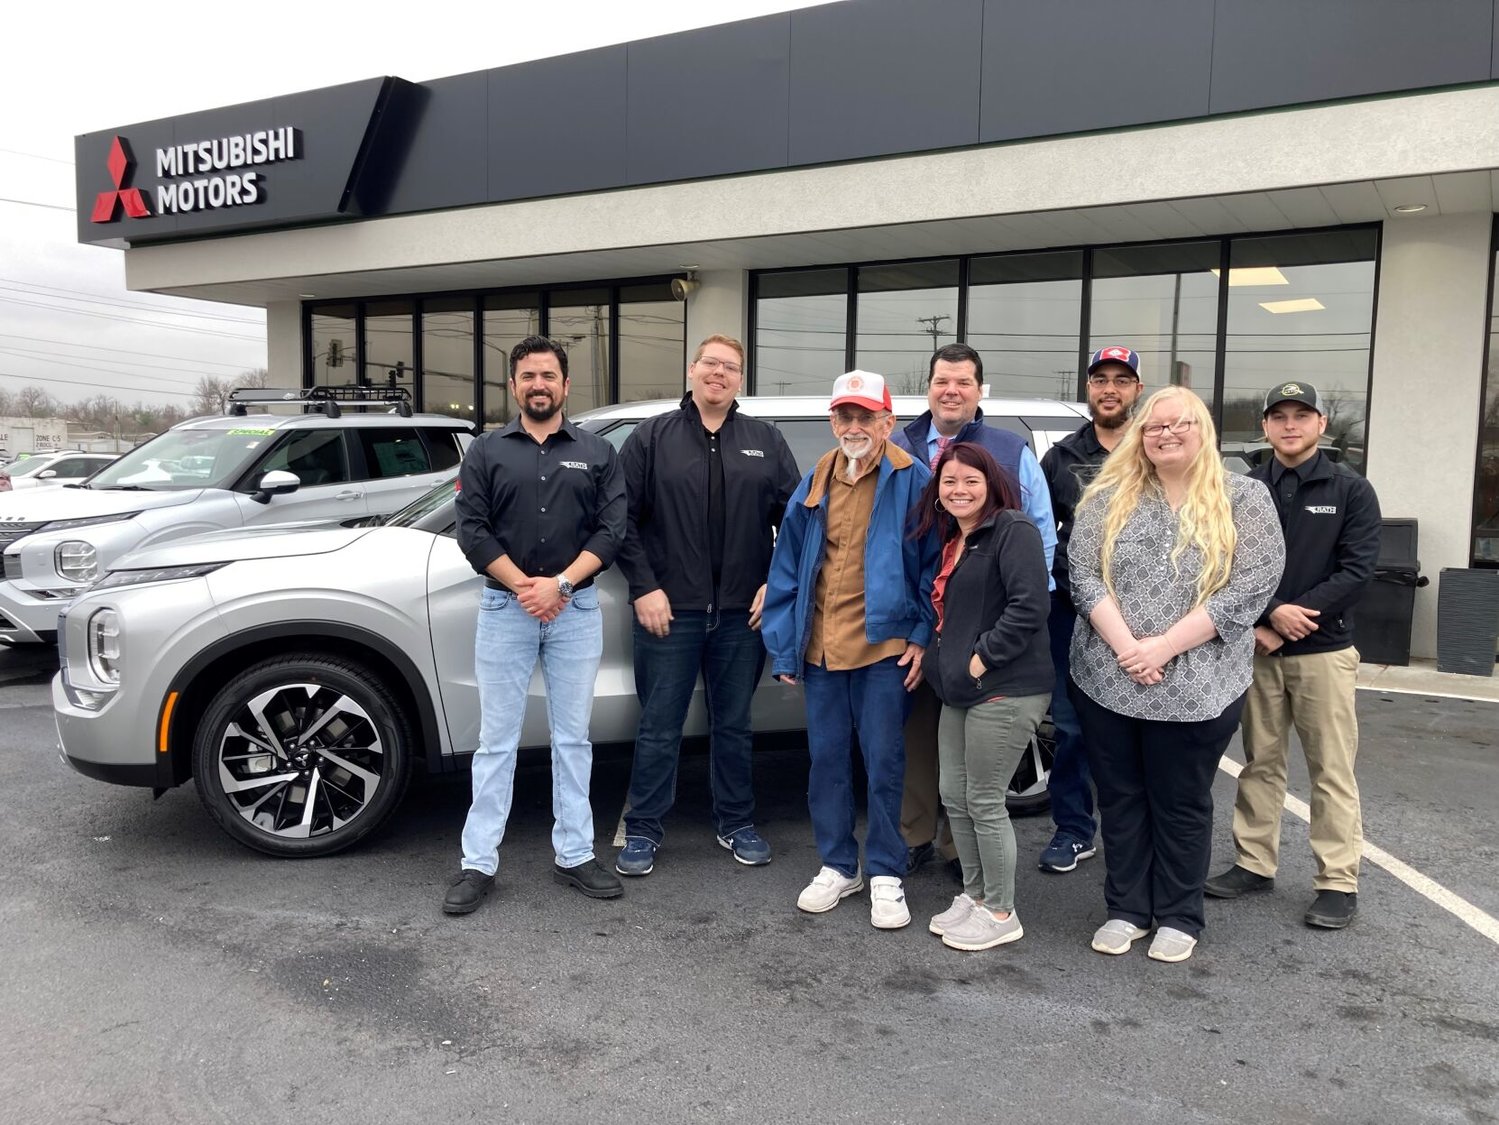 Bob Saylor (third from left), 83 of Mountain Home, was the winner of a contest called the “Mattel Hot Wheels 2022 Kroger Mitsubishi Motors Sweepstakes.” On Christmas Eve, he collected his brand new 2023 Mitsubishi Outlander from Rath Mitsubishi of Springdale. He told the staff it was his first new car in 37 years.


Submitted Photo